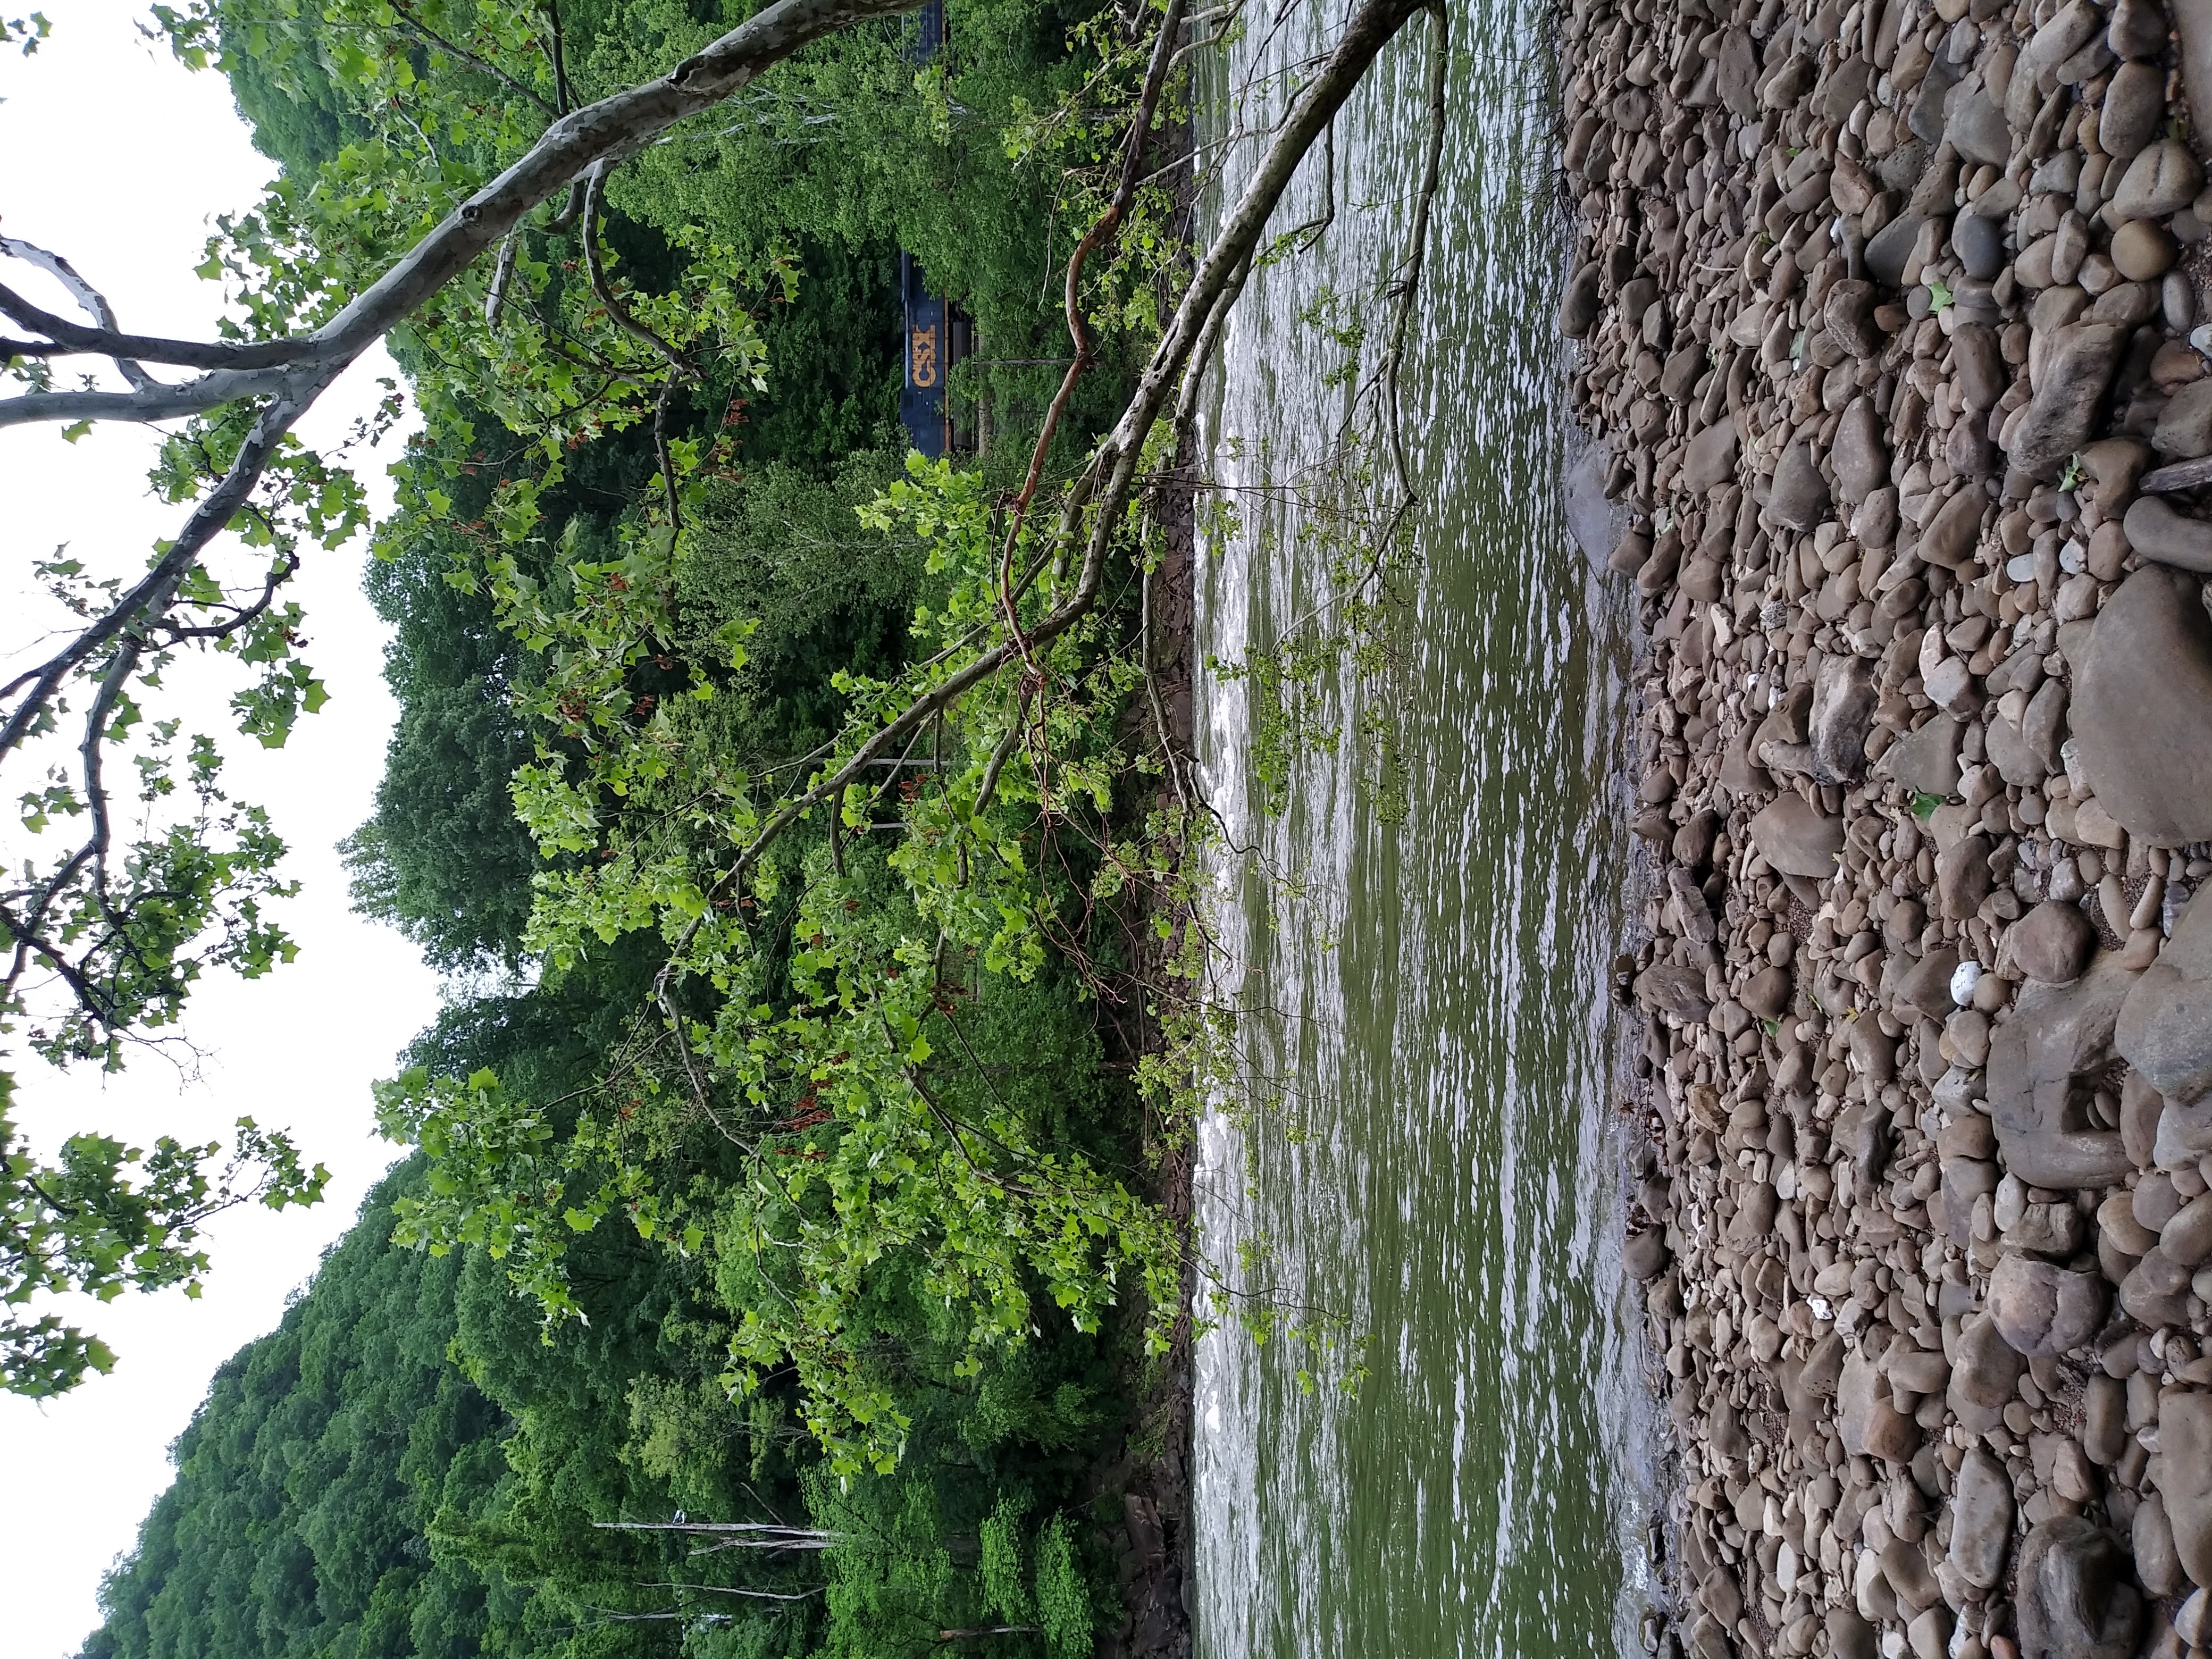 At the river, just steps from my campsite